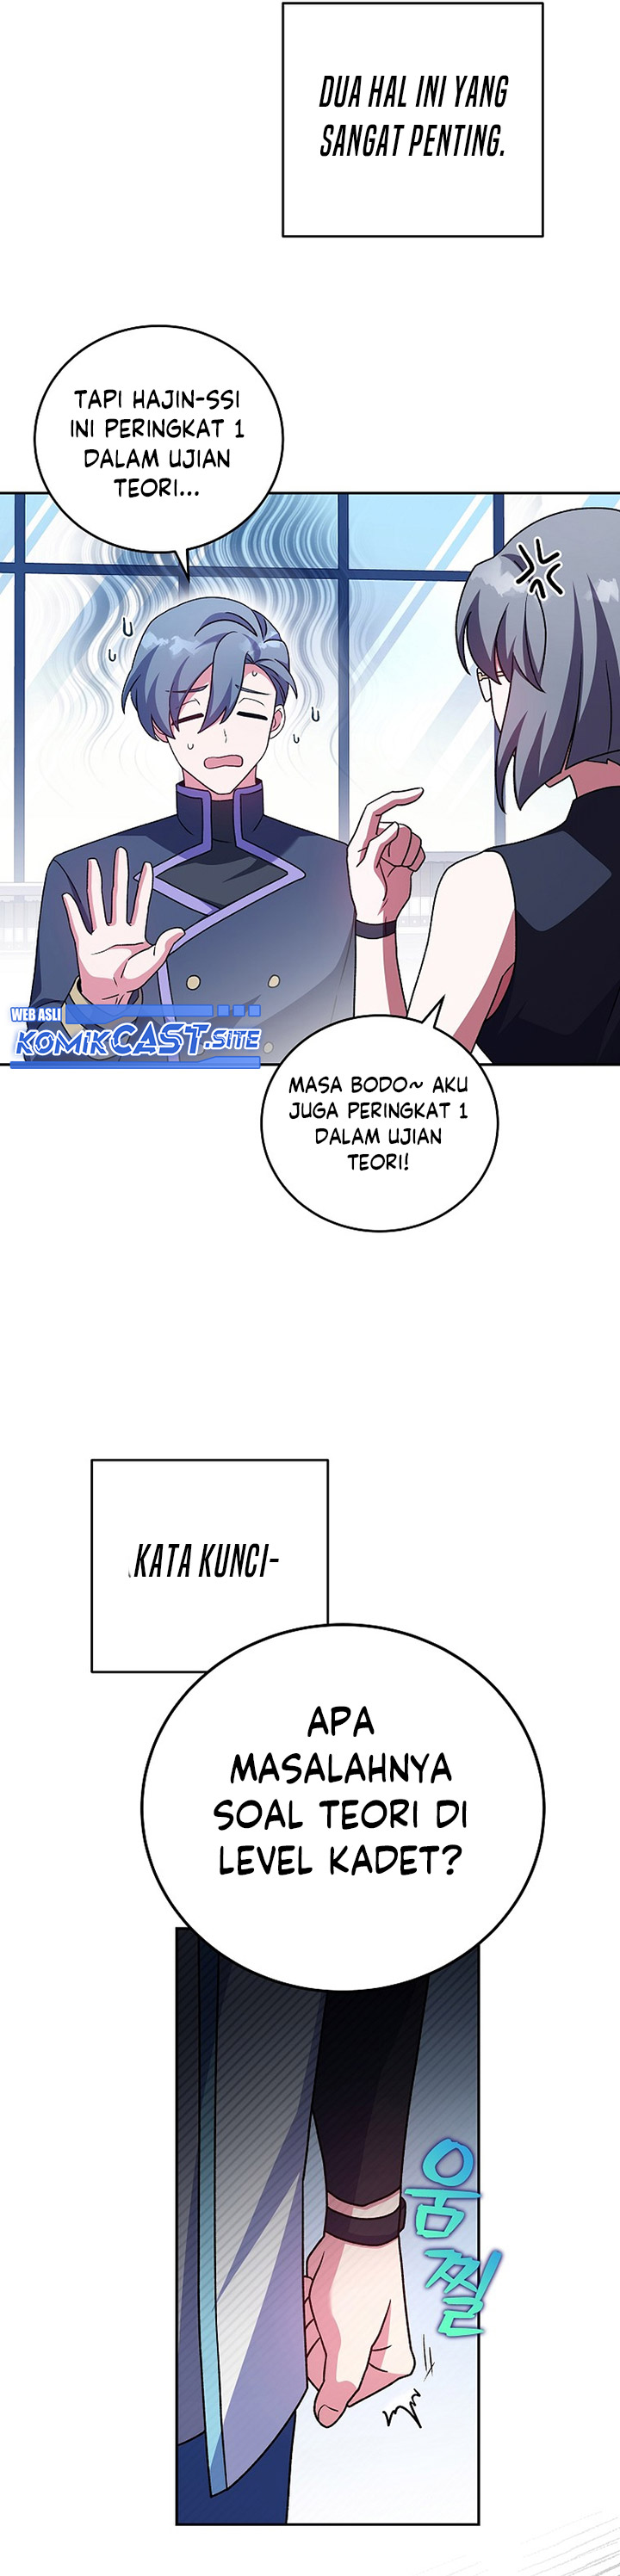 The Novel’s Extra (Remake) Chapter 61